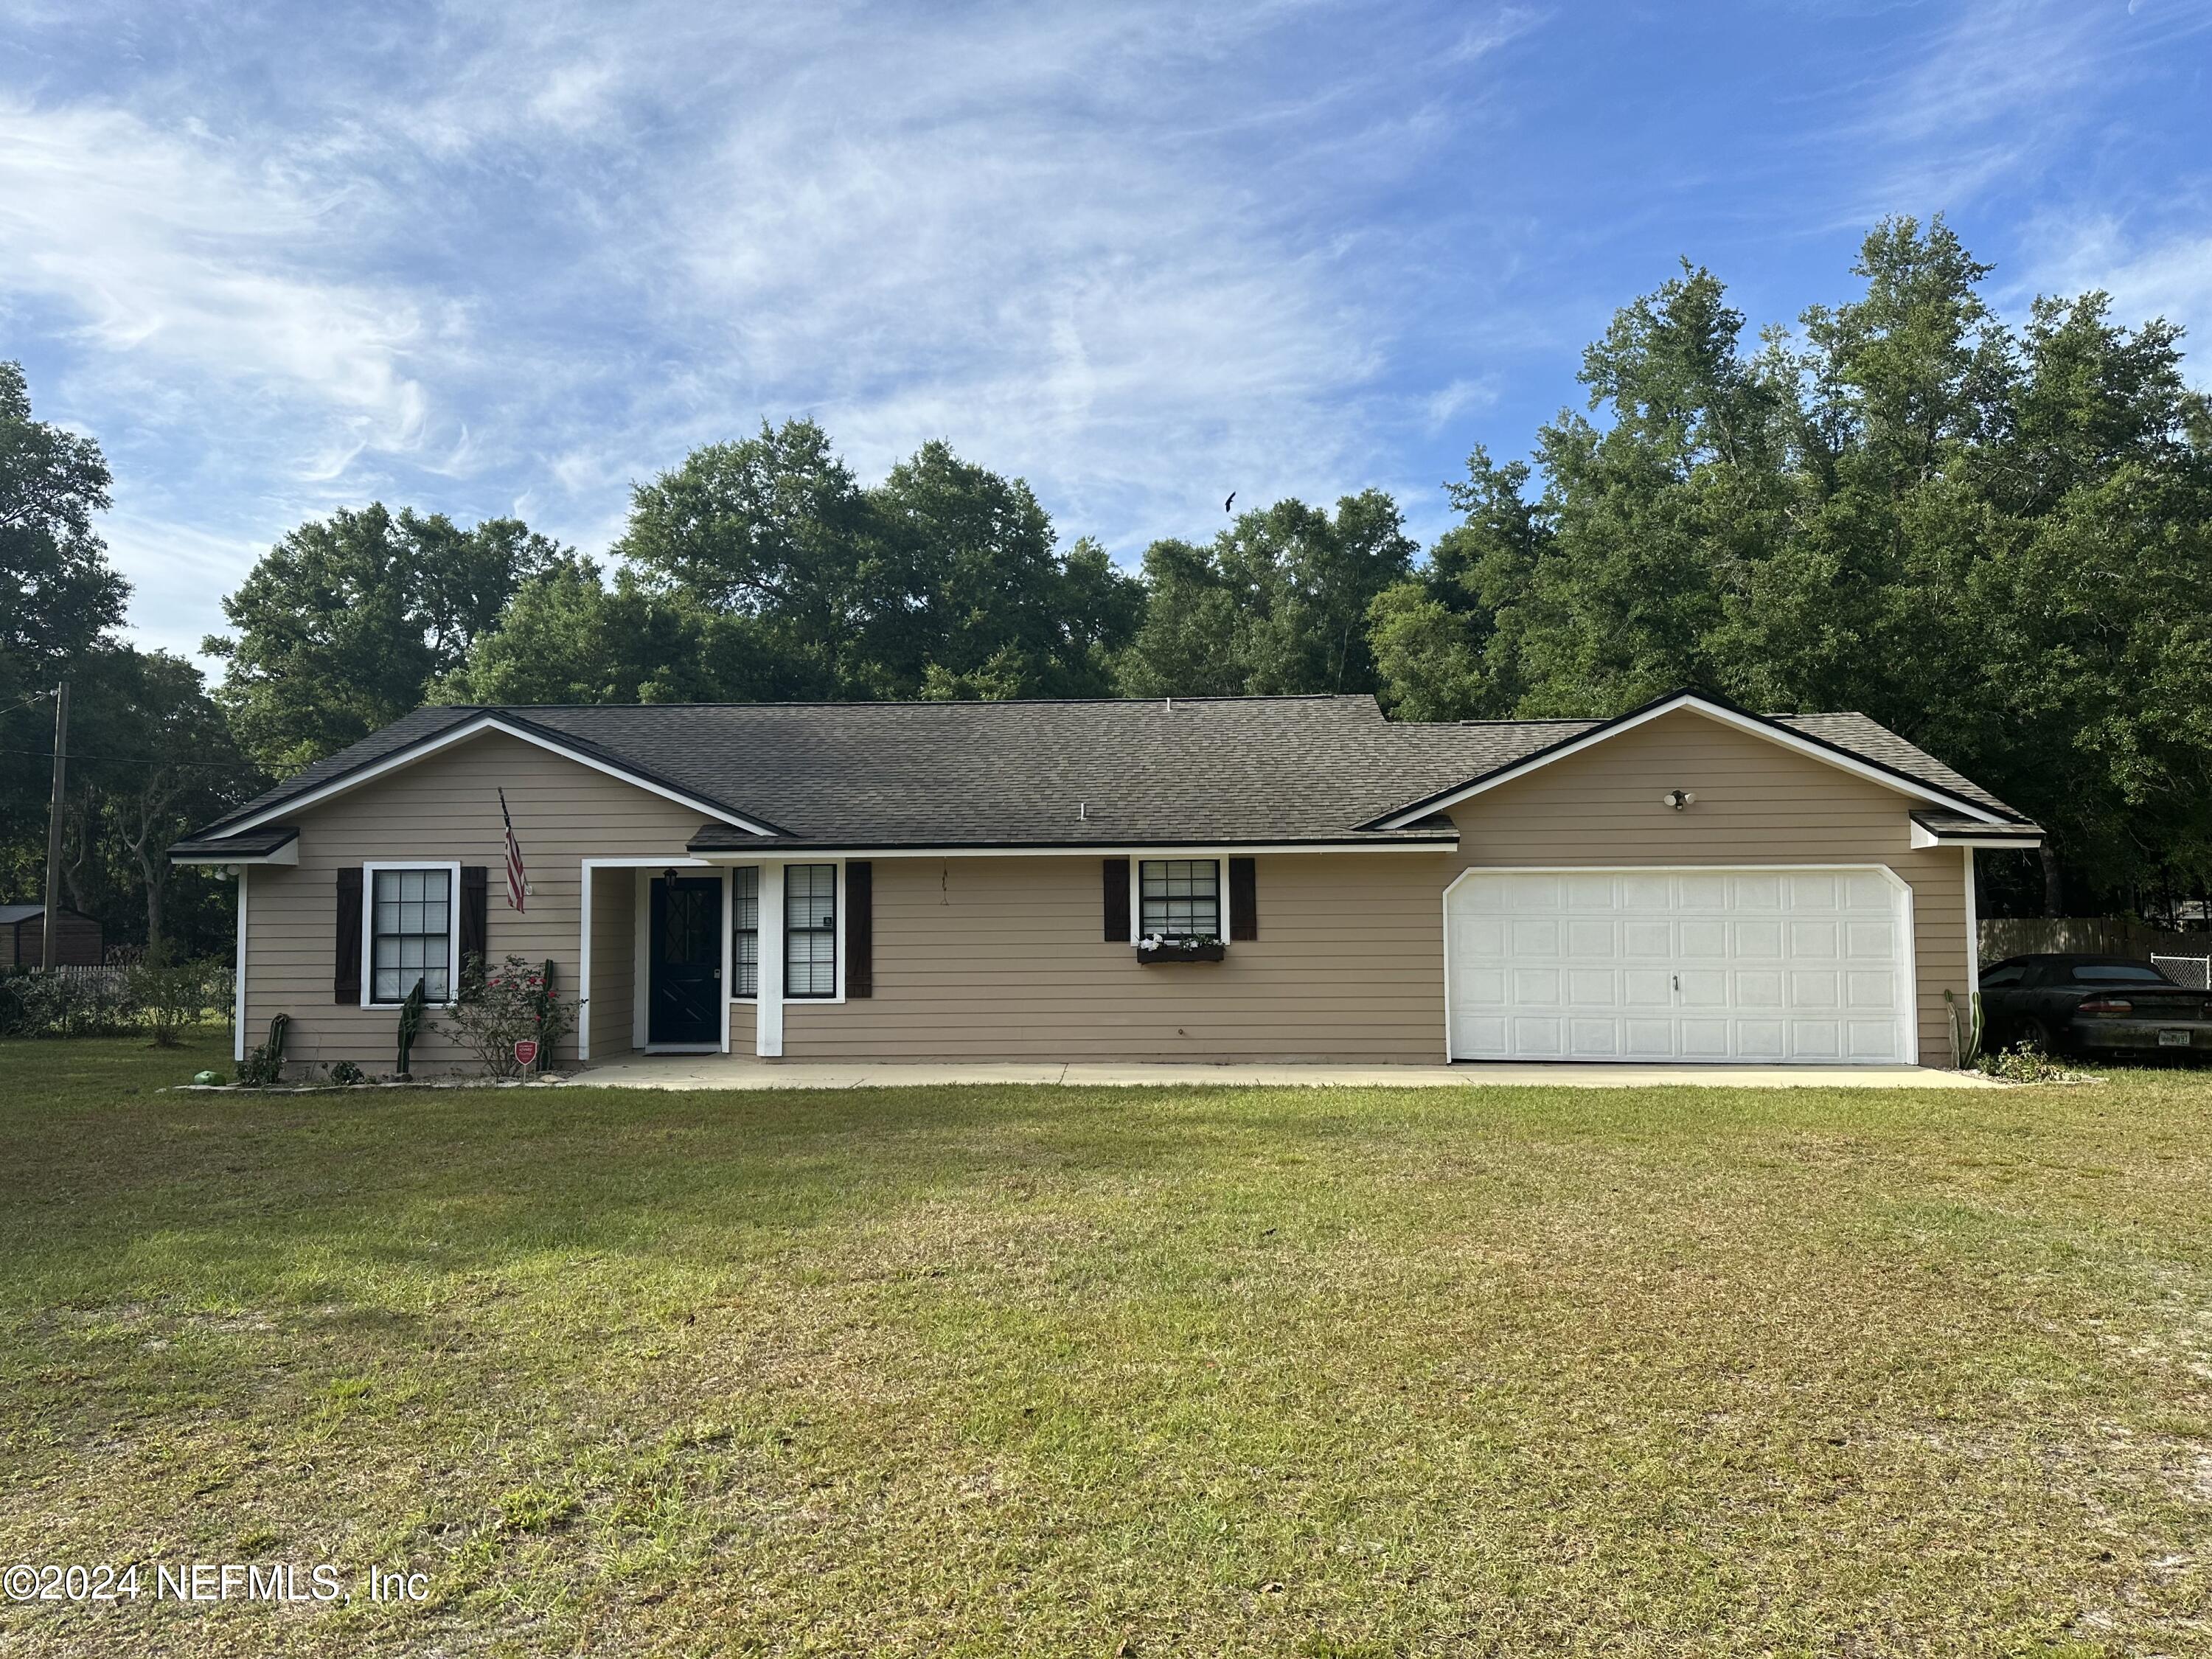 Middleburg, FL home for sale located at 4795 Timothy Street, Middleburg, FL 32068